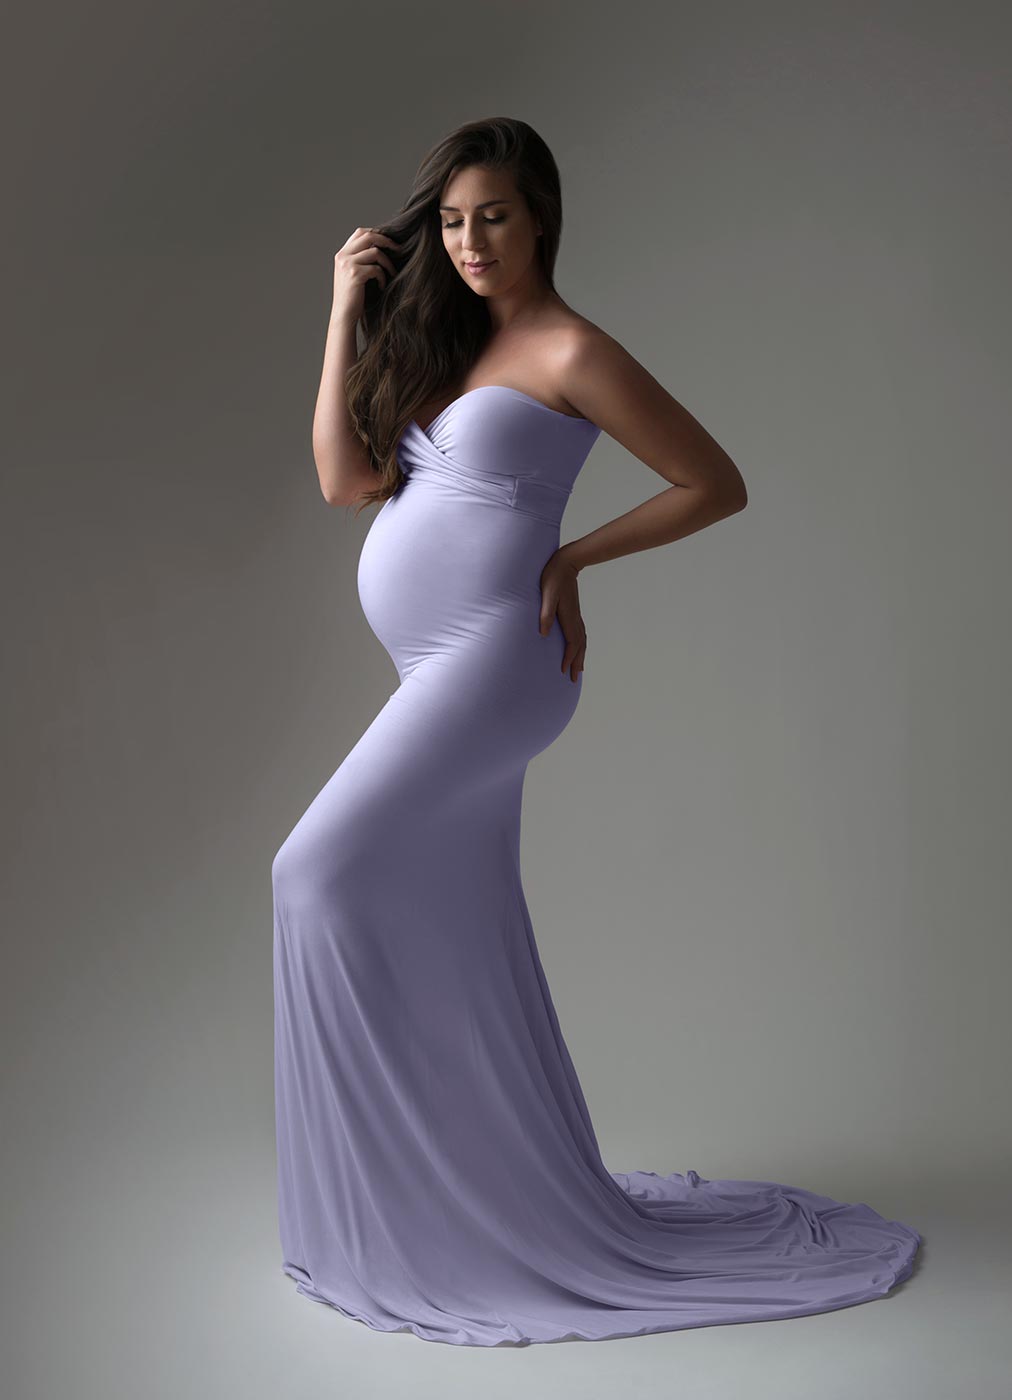 beautiful lavender dress pregnant woman playing with her hair